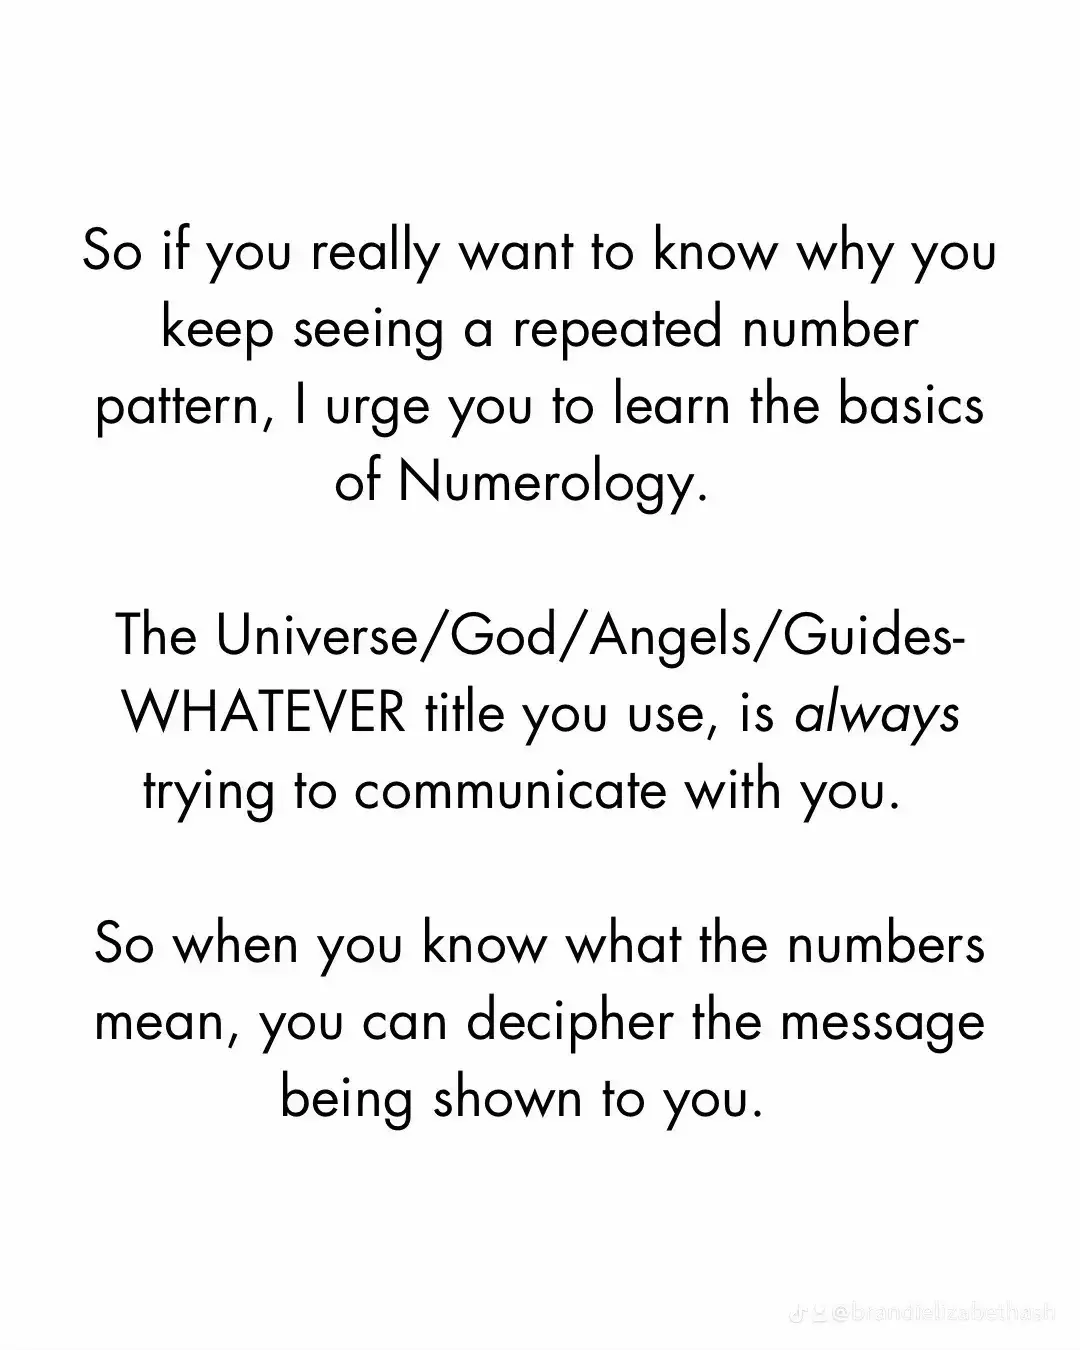  A white background with a text that says "If you really want to know why you keep seeing a repeated number pattern, I urge you to learn the basics of Numerology. The Universe/God/Angels/Guides-WHATEVER title you use, is always trying to communicate with you. So when you know what the numbers mean, you can decipher the message being shown to you."